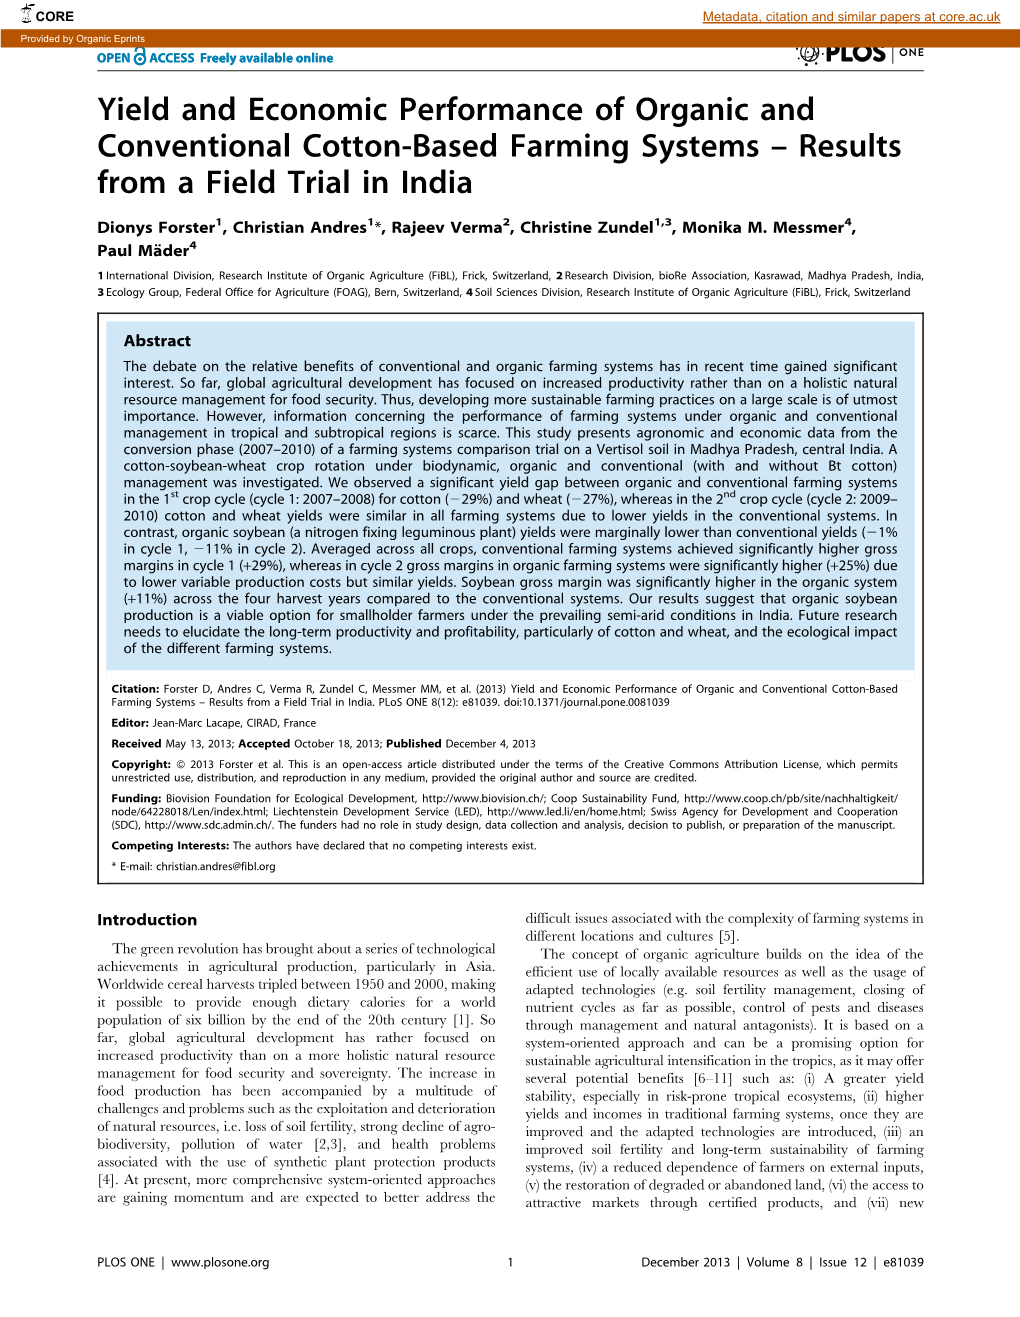 Yield and Economic Performance of Organic and Conventional Cotton-Based Farming Systems – Results from a Field Trial in India